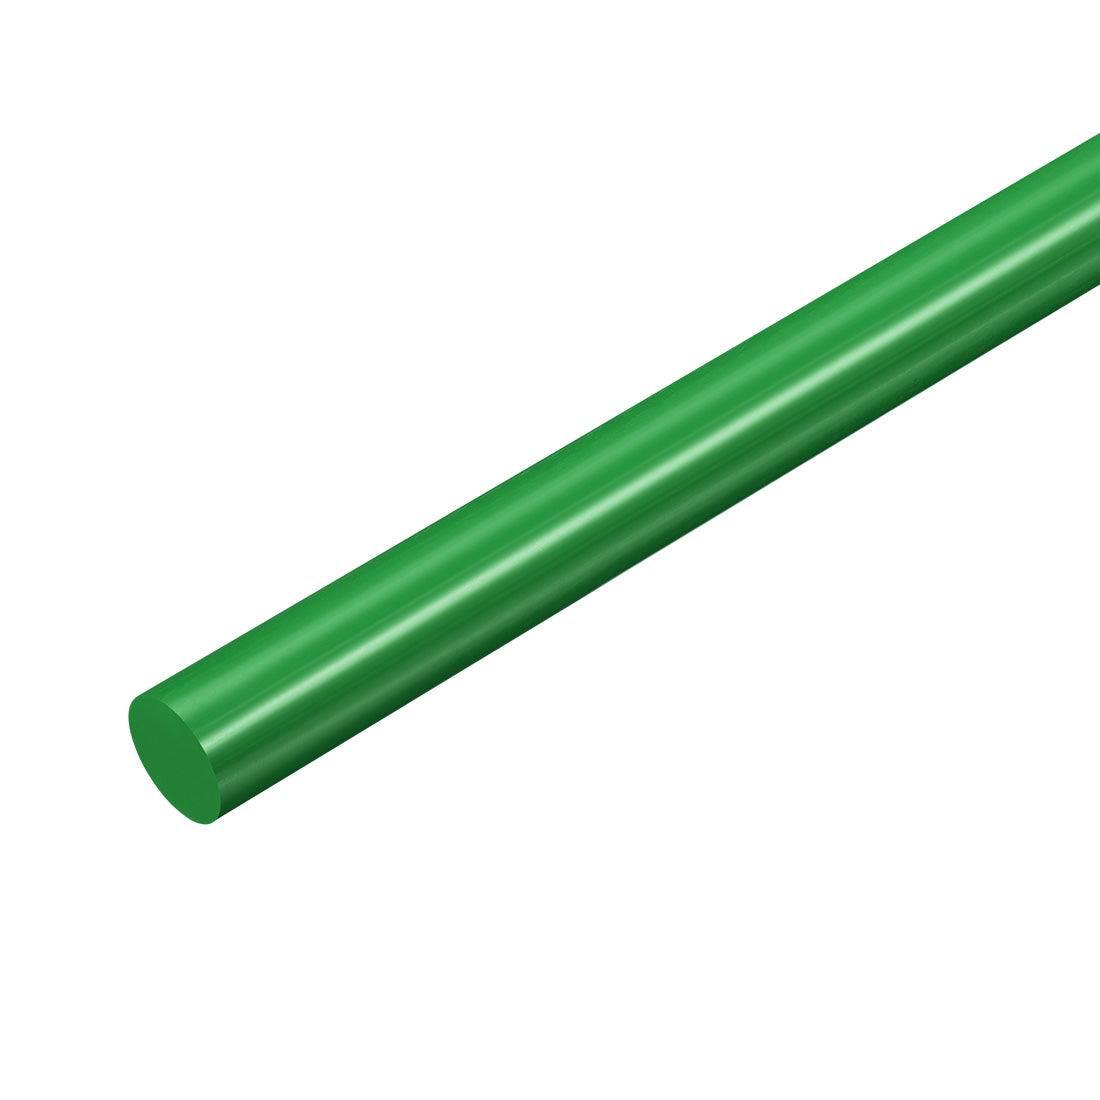 uxcell Uxcell Plastic Round Rod,10mm Dia 50cm Green Engineering Plastic Round Bar